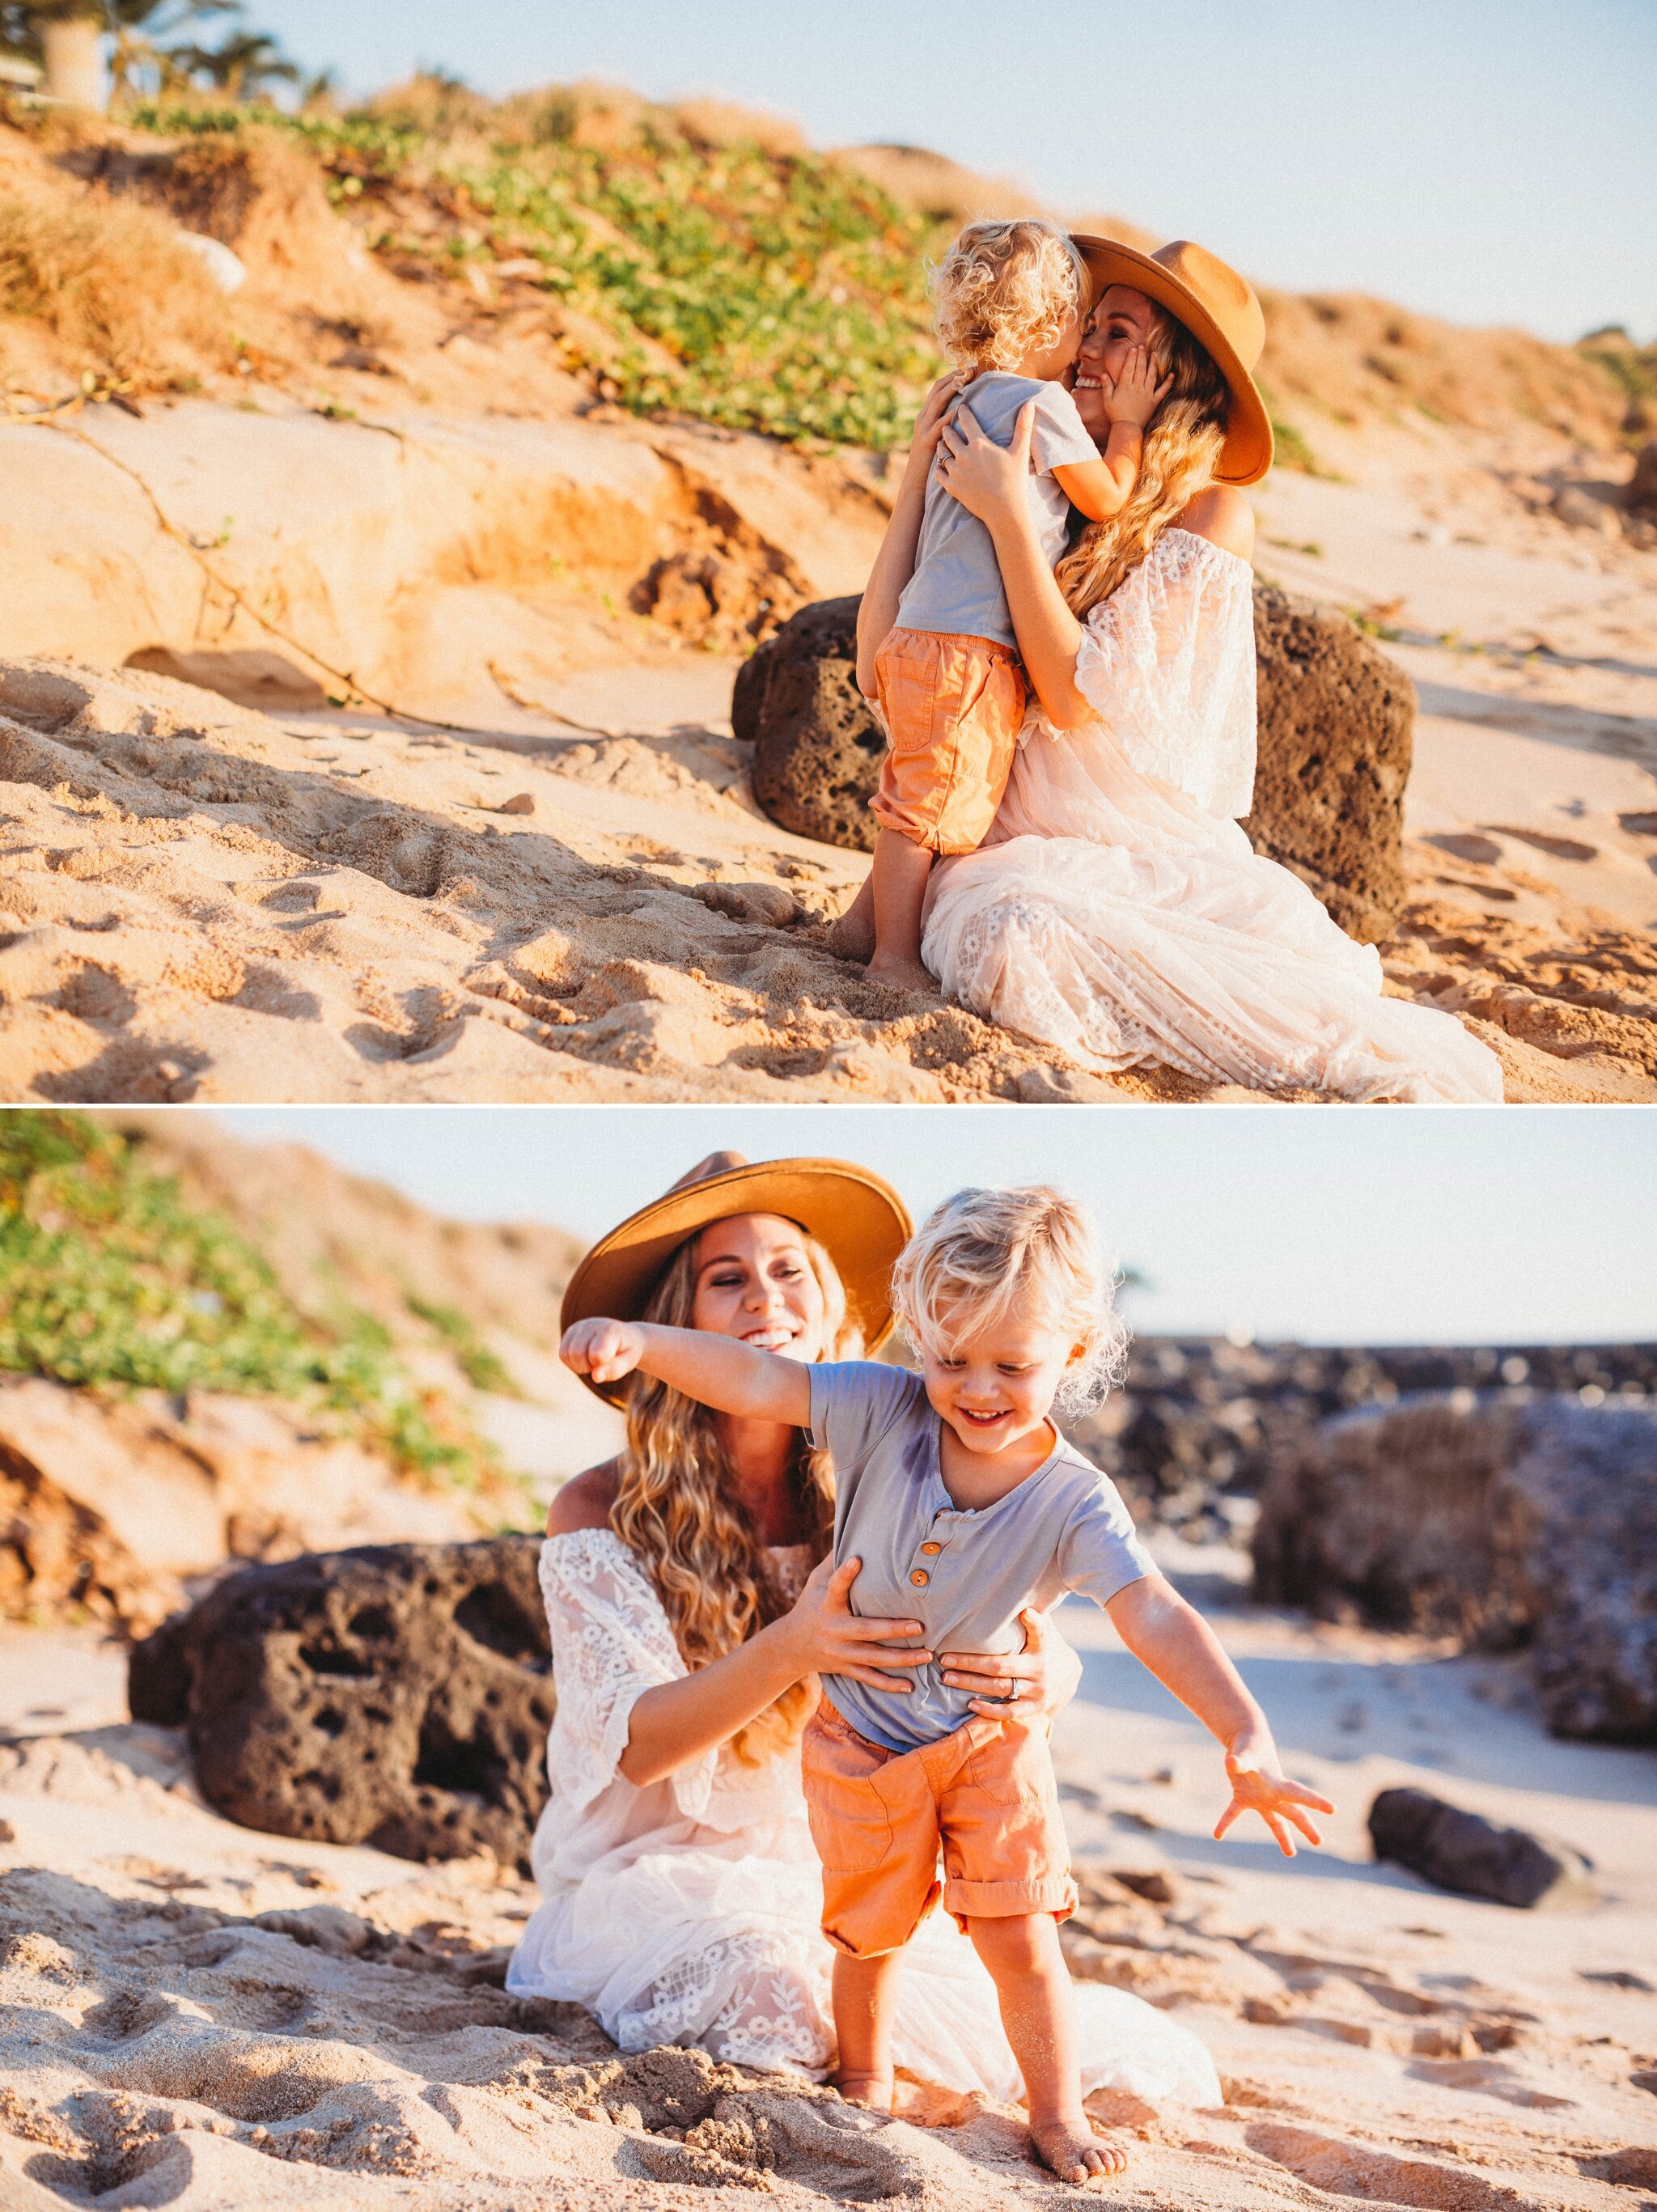 Mommy and me sunset photography Session at Electric Beach, Kapolei - Oahu, Hawaii Maternity Photographer